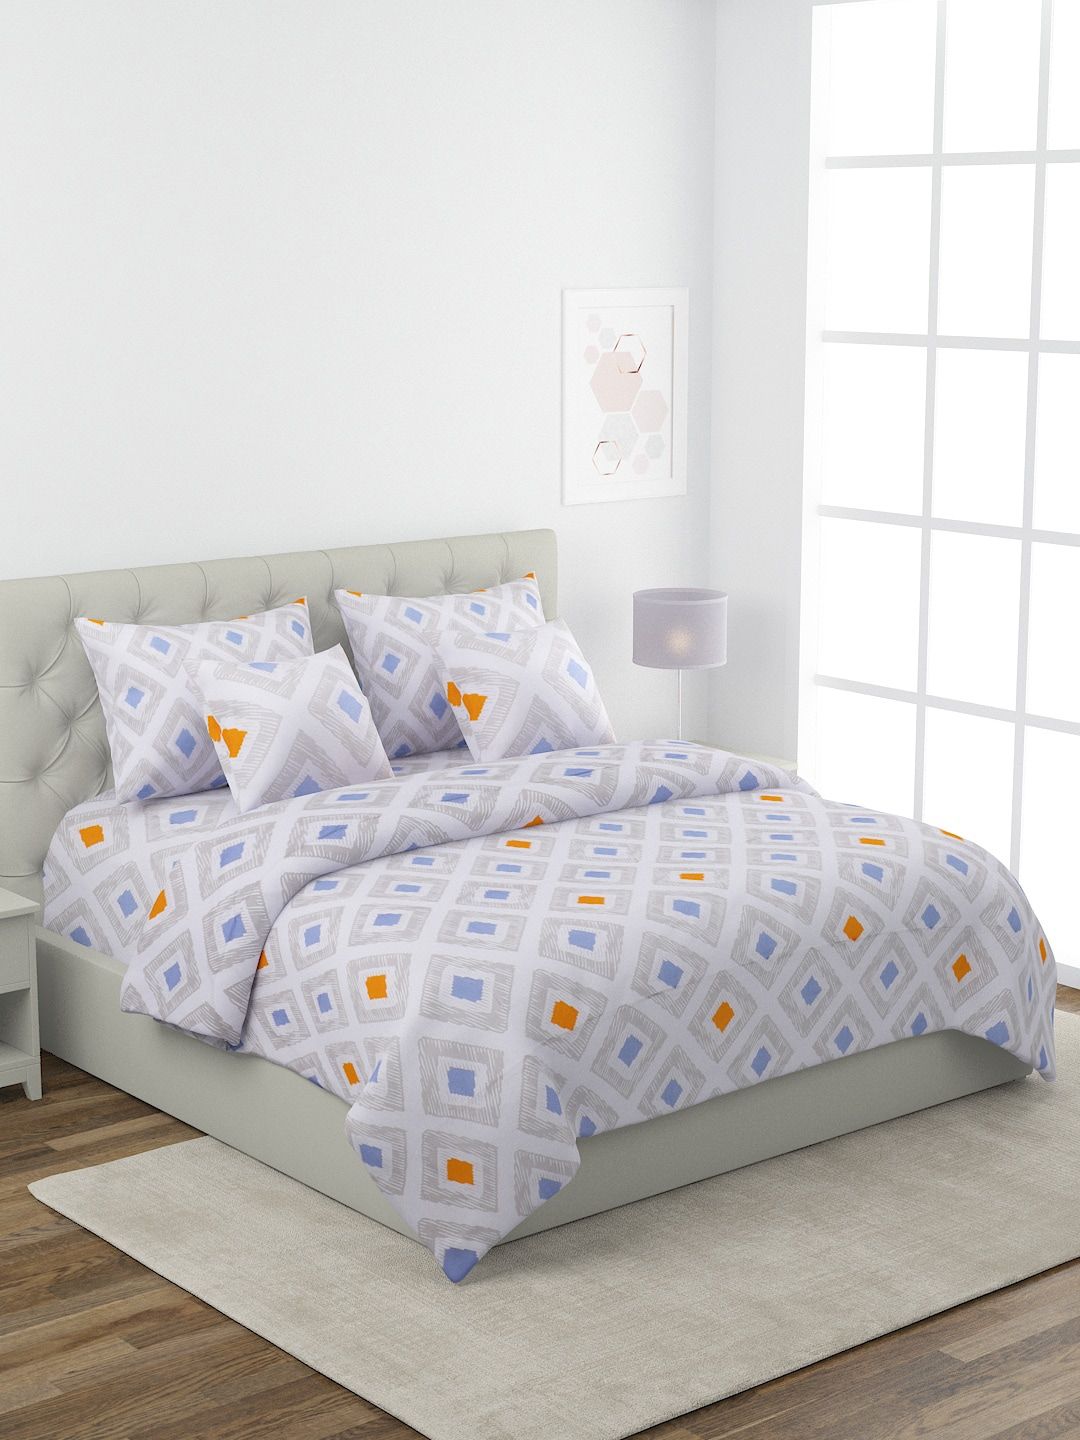 ROMEE Grey & Blue Geometric Printed Double King Bedding Set with AC Comforter Price in India